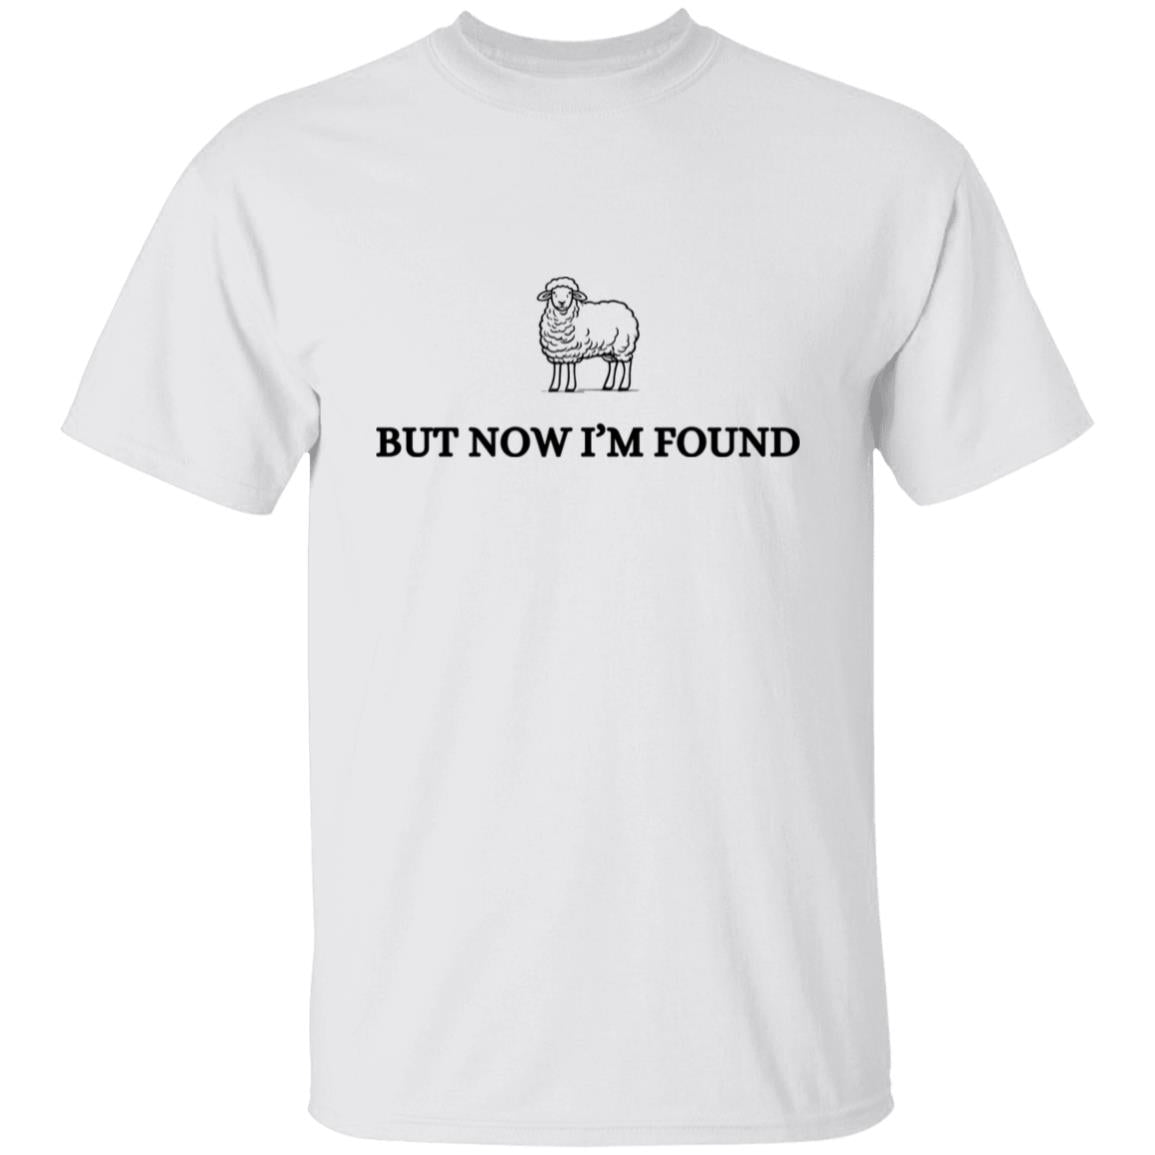 Get trendy with But Now I'm Found But Now I'm Found T-Shirt - T-Shirts available at Good Gift Company. Grab yours for $24.95 today!